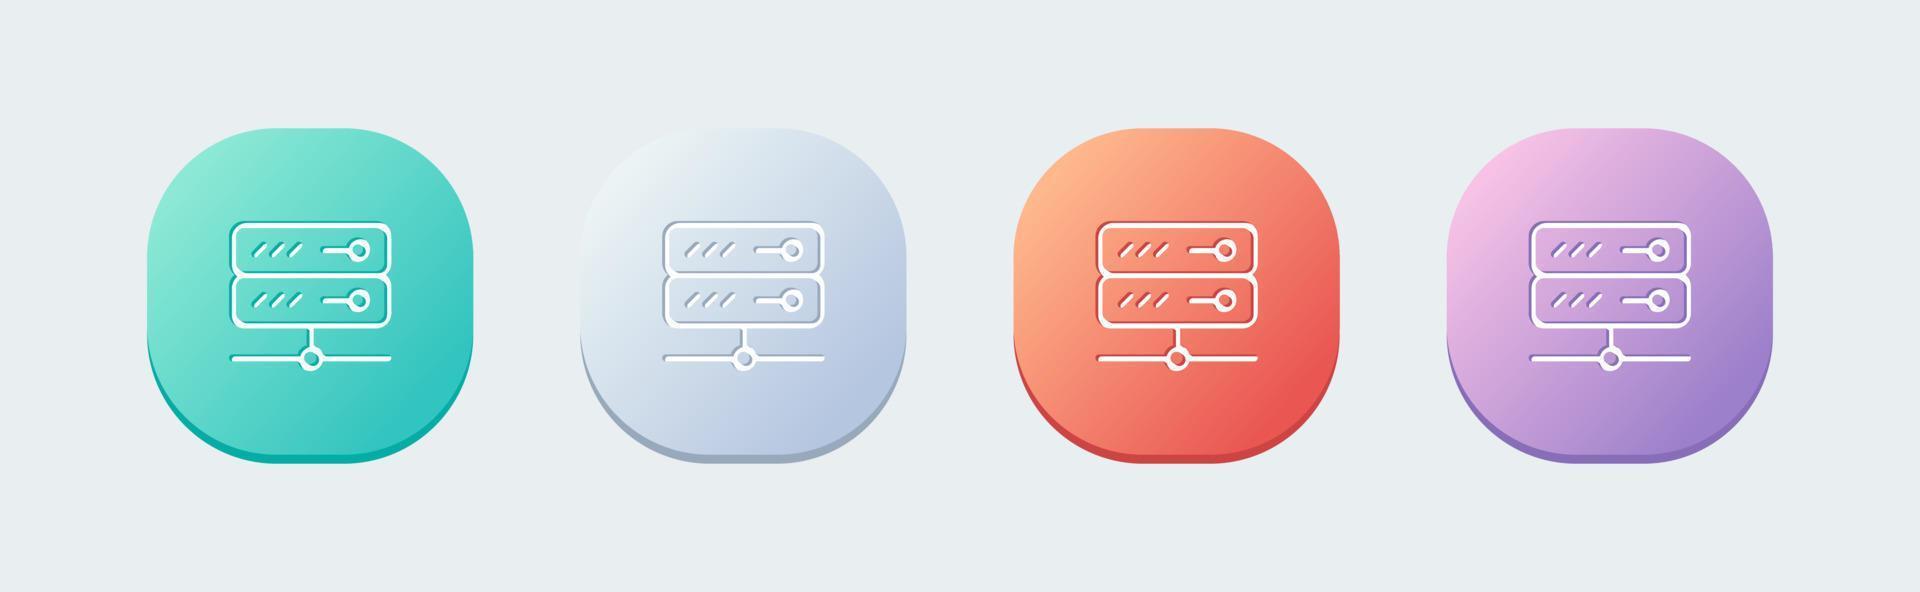 Server line icon in flat design style. Database signs vector illustration.